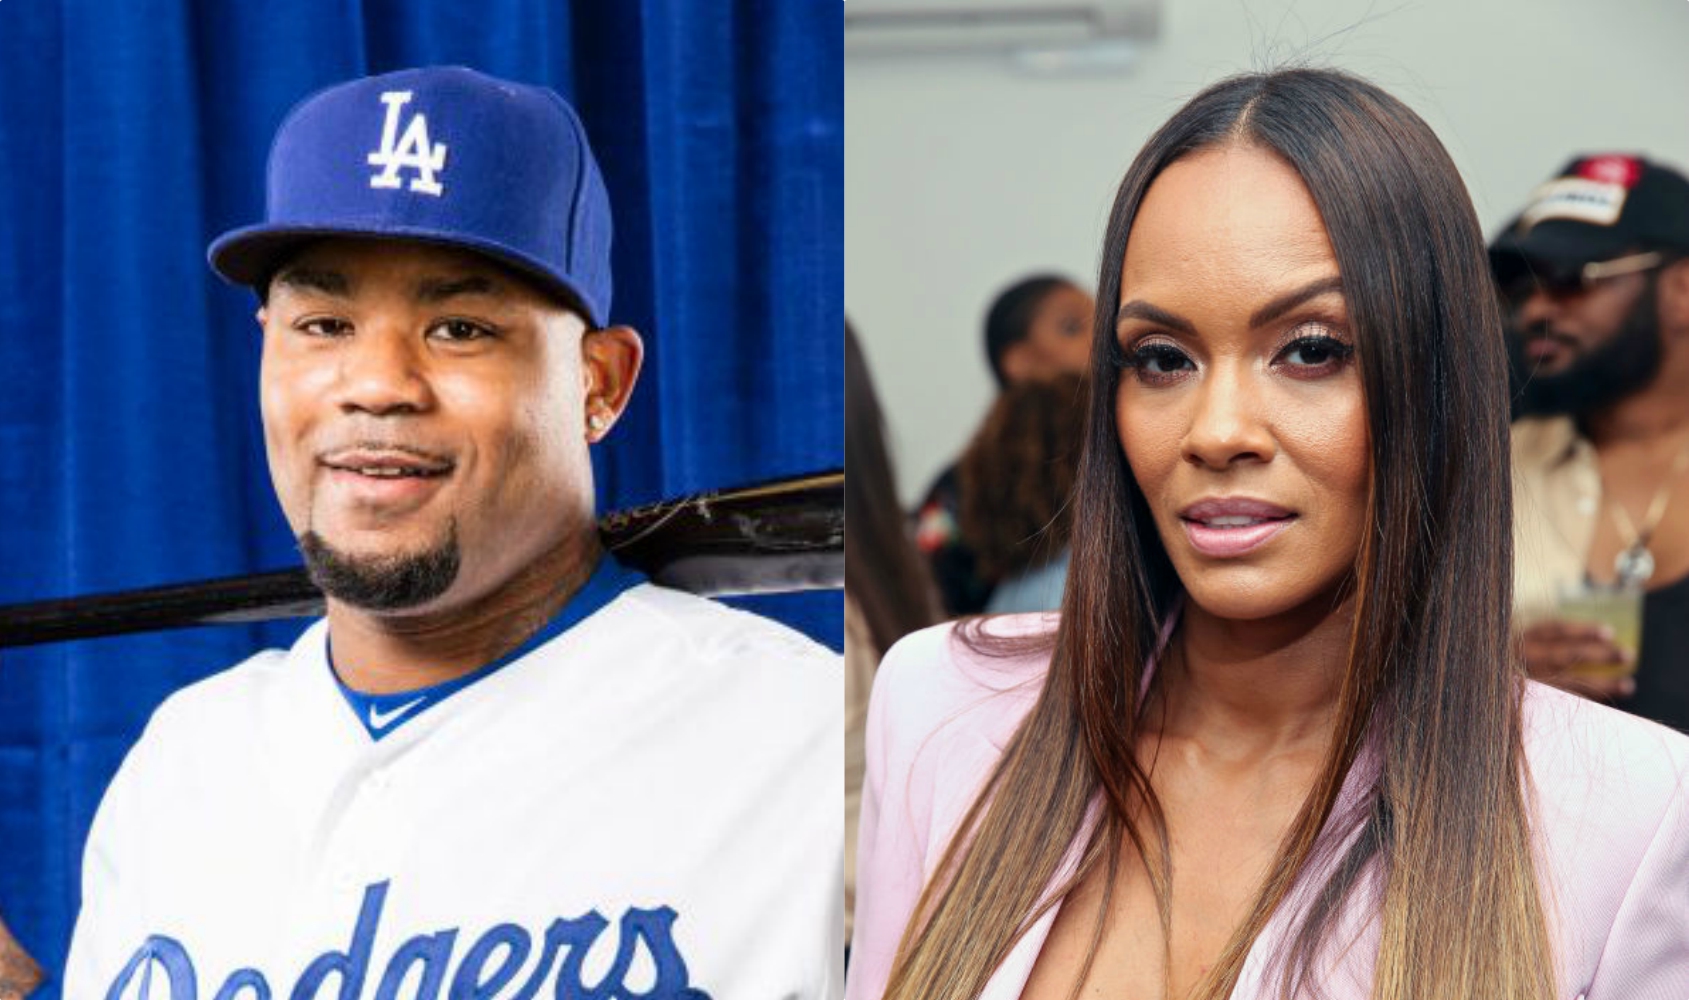 That Was Fast: Carl Crawford Allegedly Has 5th Child With New Baby